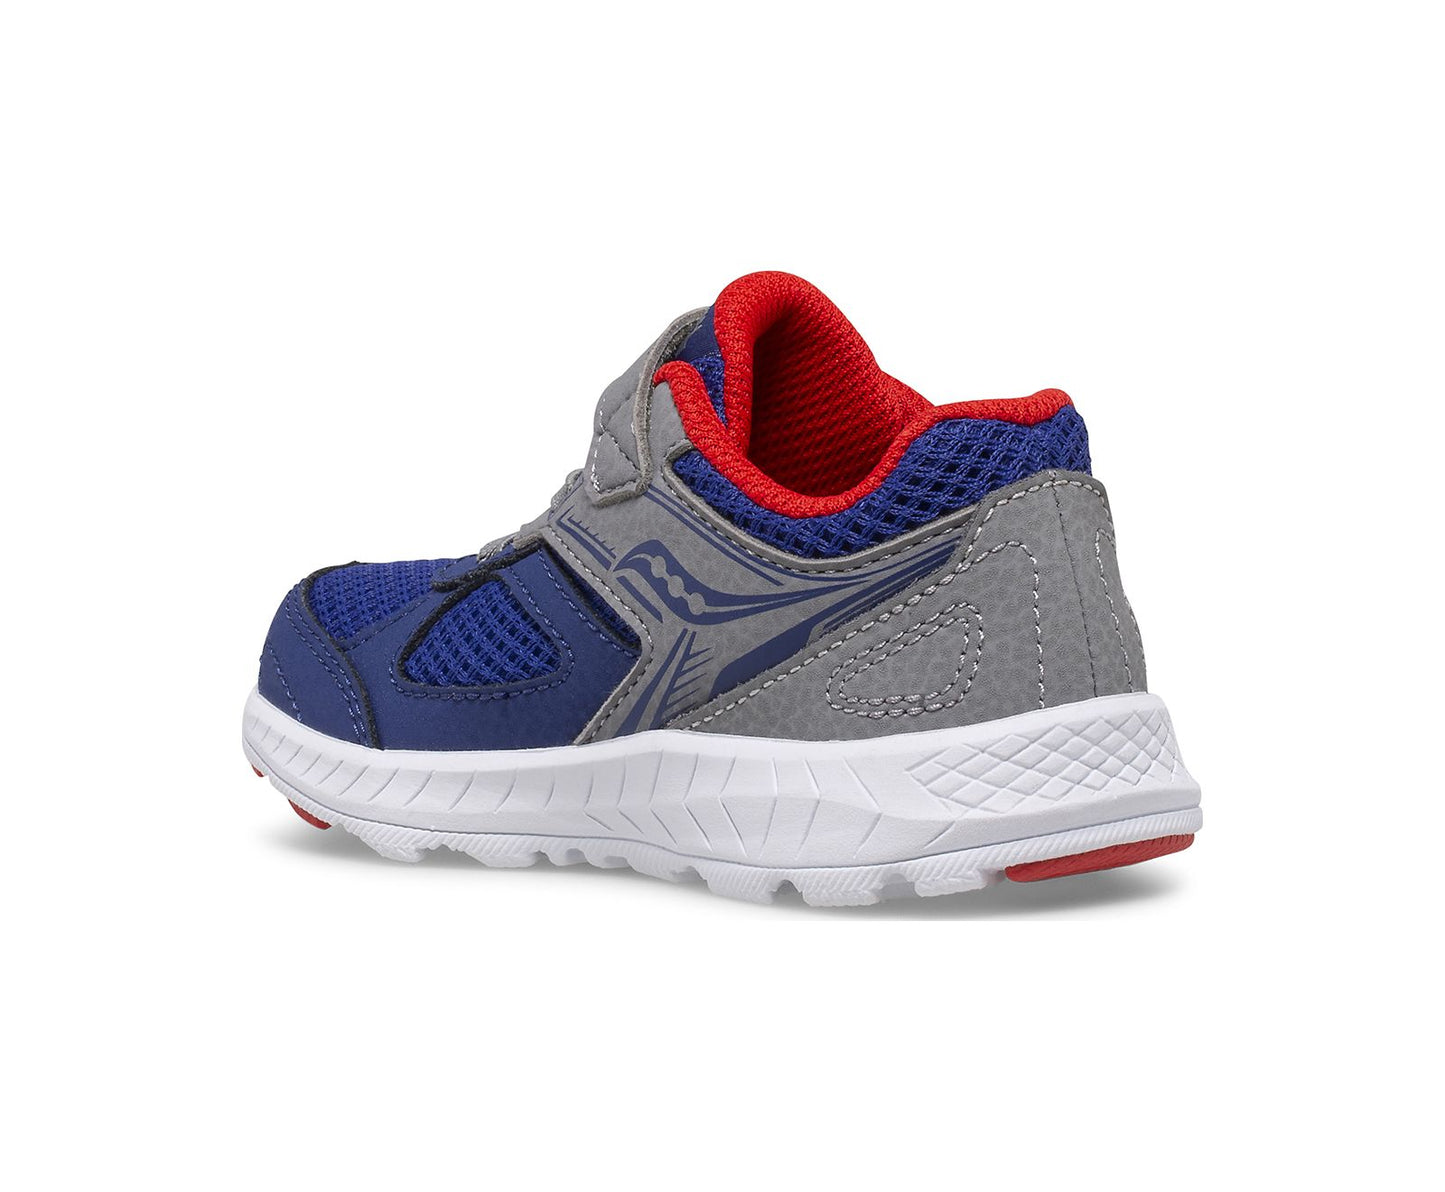 Cohesion 14 A/C Jr. Sneaker Navy/Red (4c-10c)